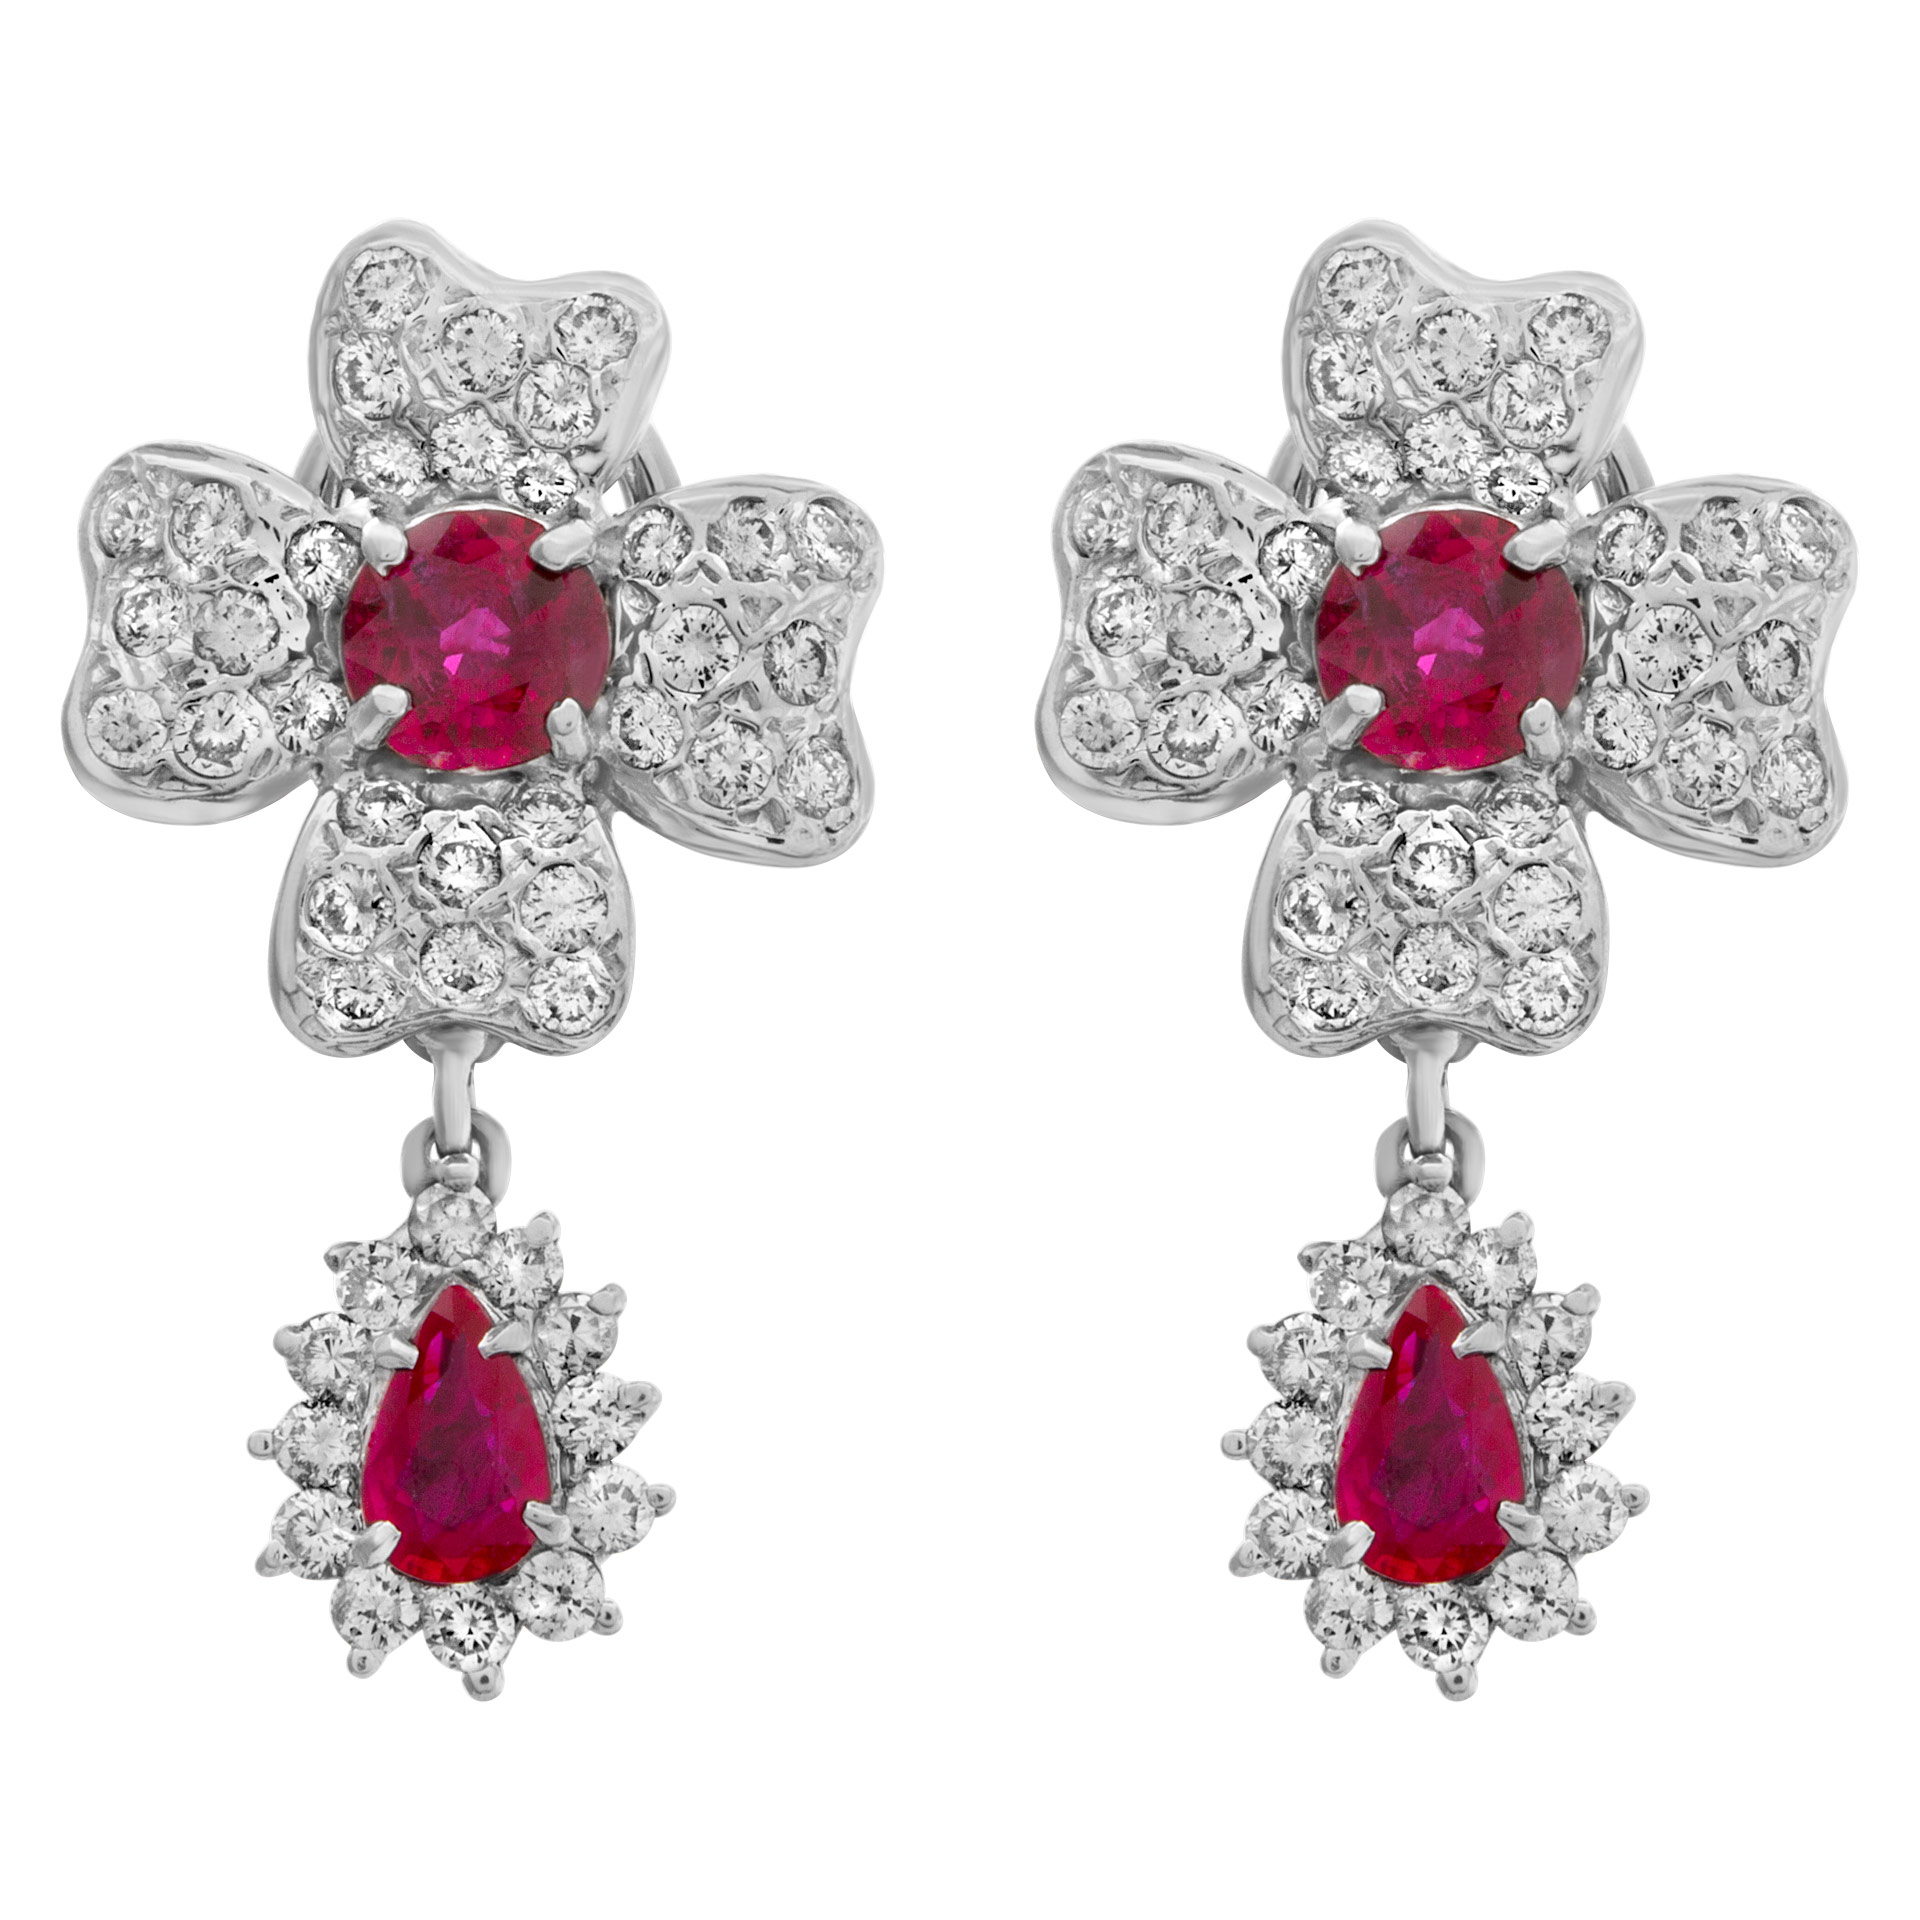 Diamond and ruby floral design earrings in 18k white gold. image 1